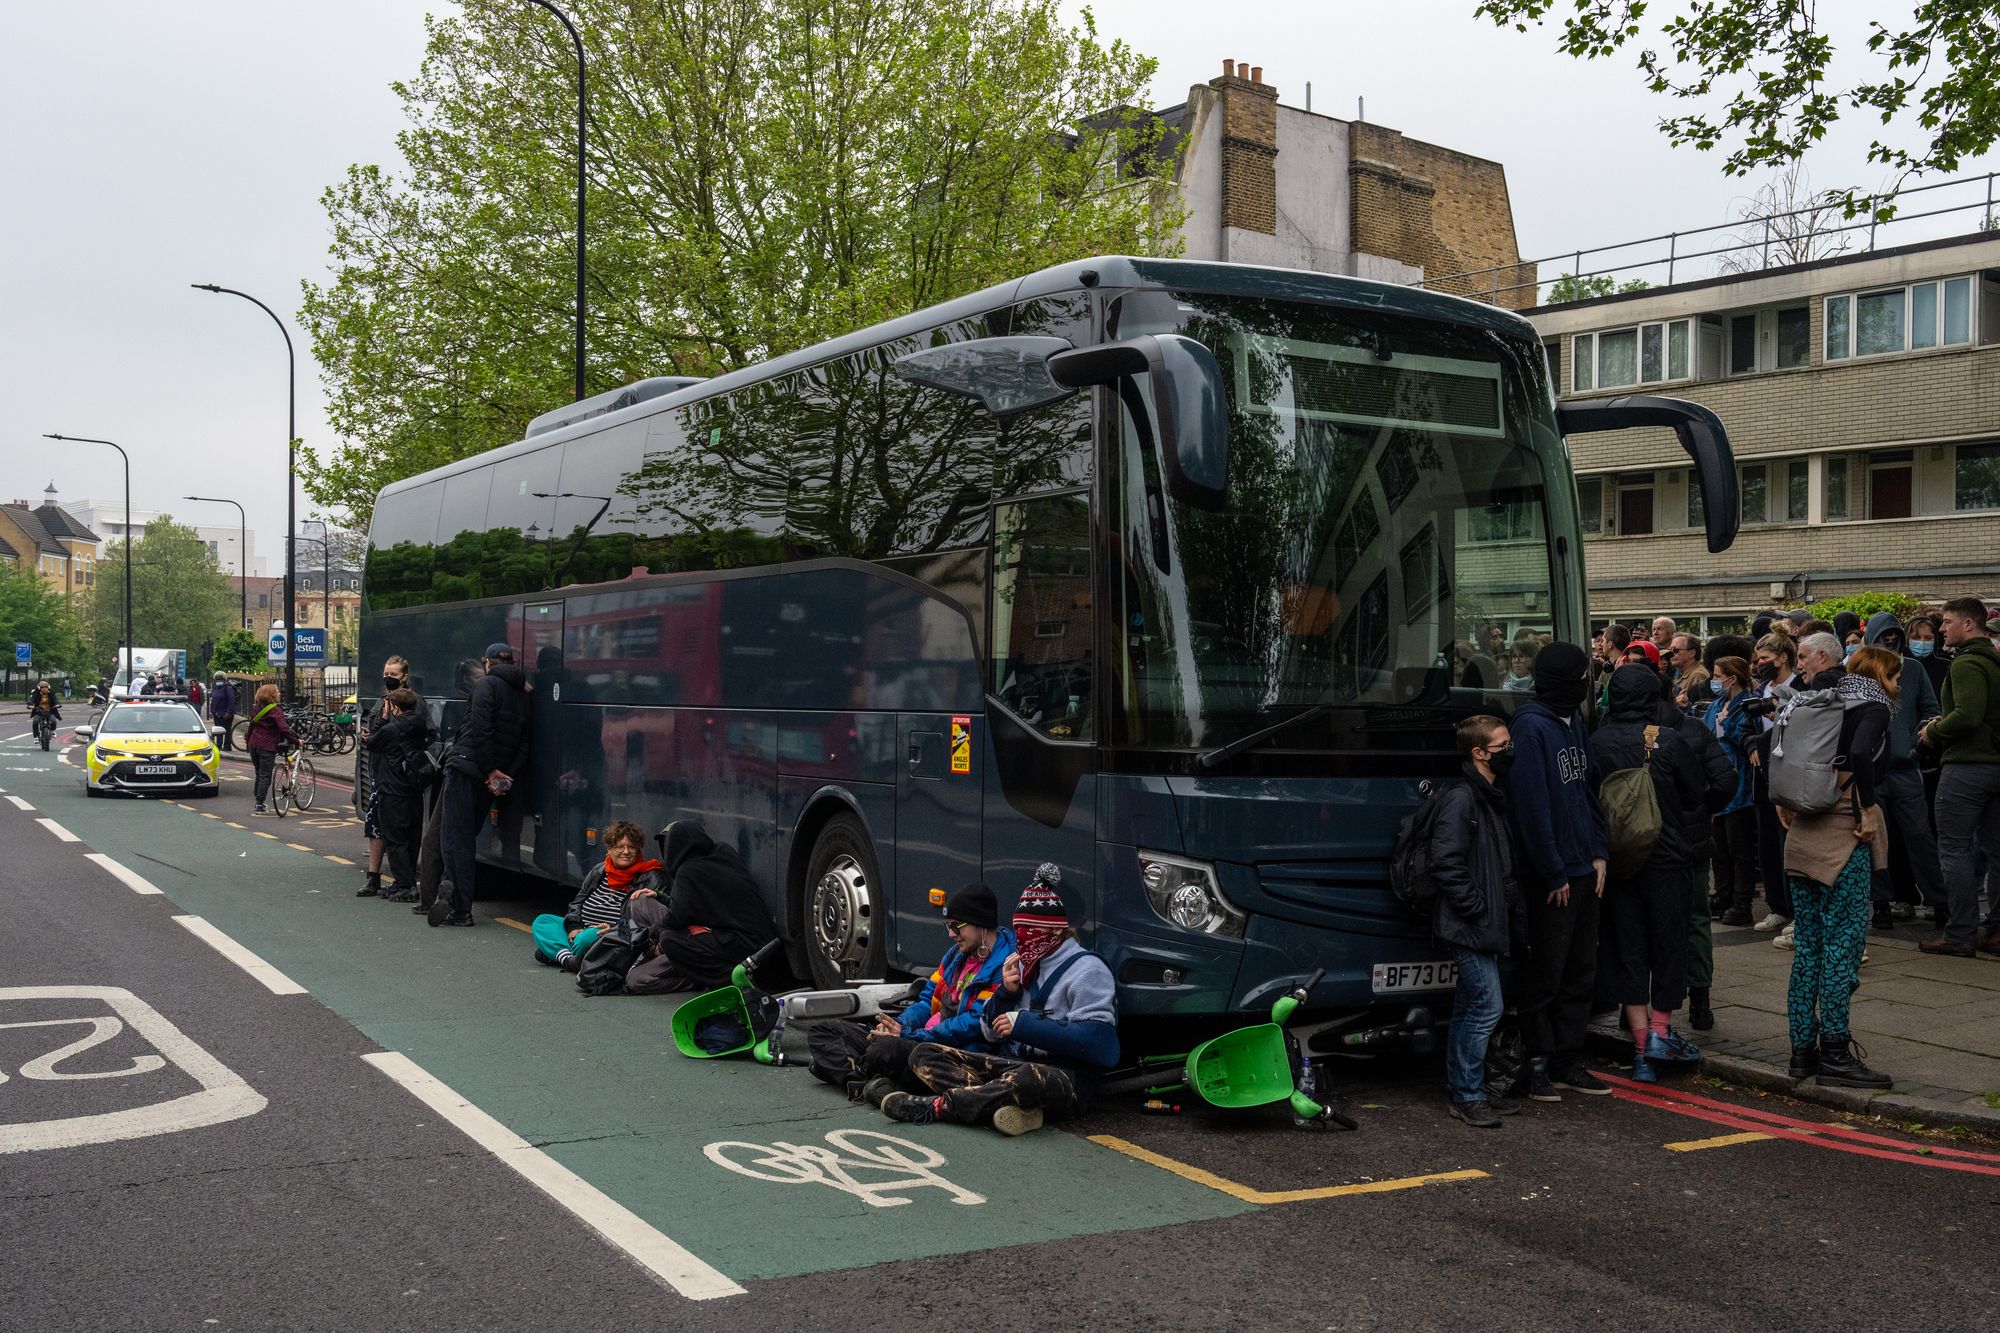 'refugees are welcome here!': protesters in peckham block coach from taking asylum seekers to bibby stockholm barge